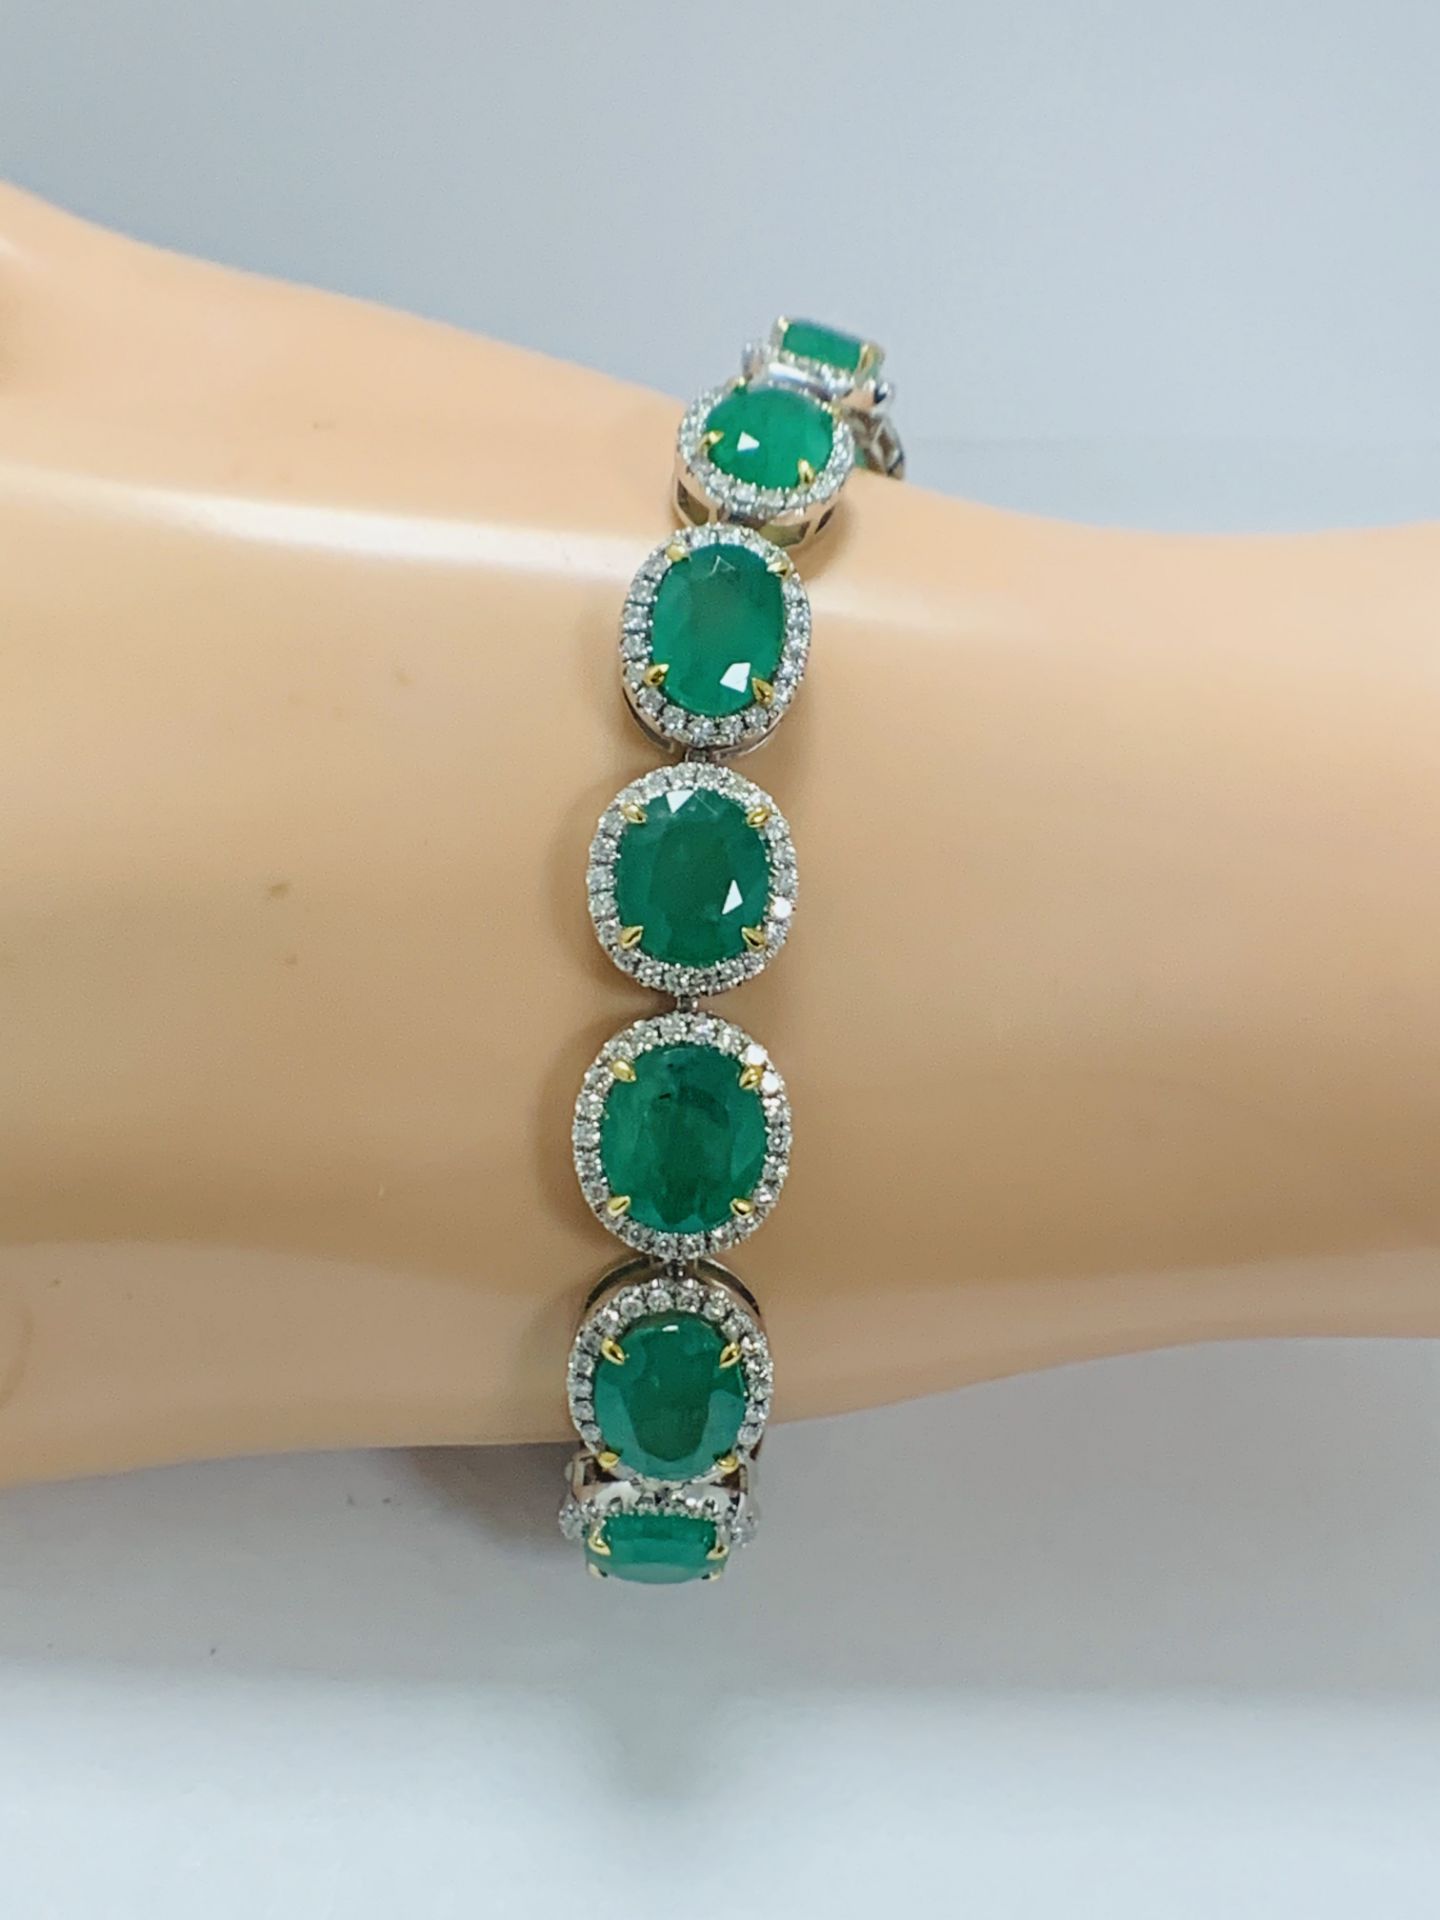 Platinum and Yellow Gold Emerald and Diamond Bracelet - Image 13 of 17